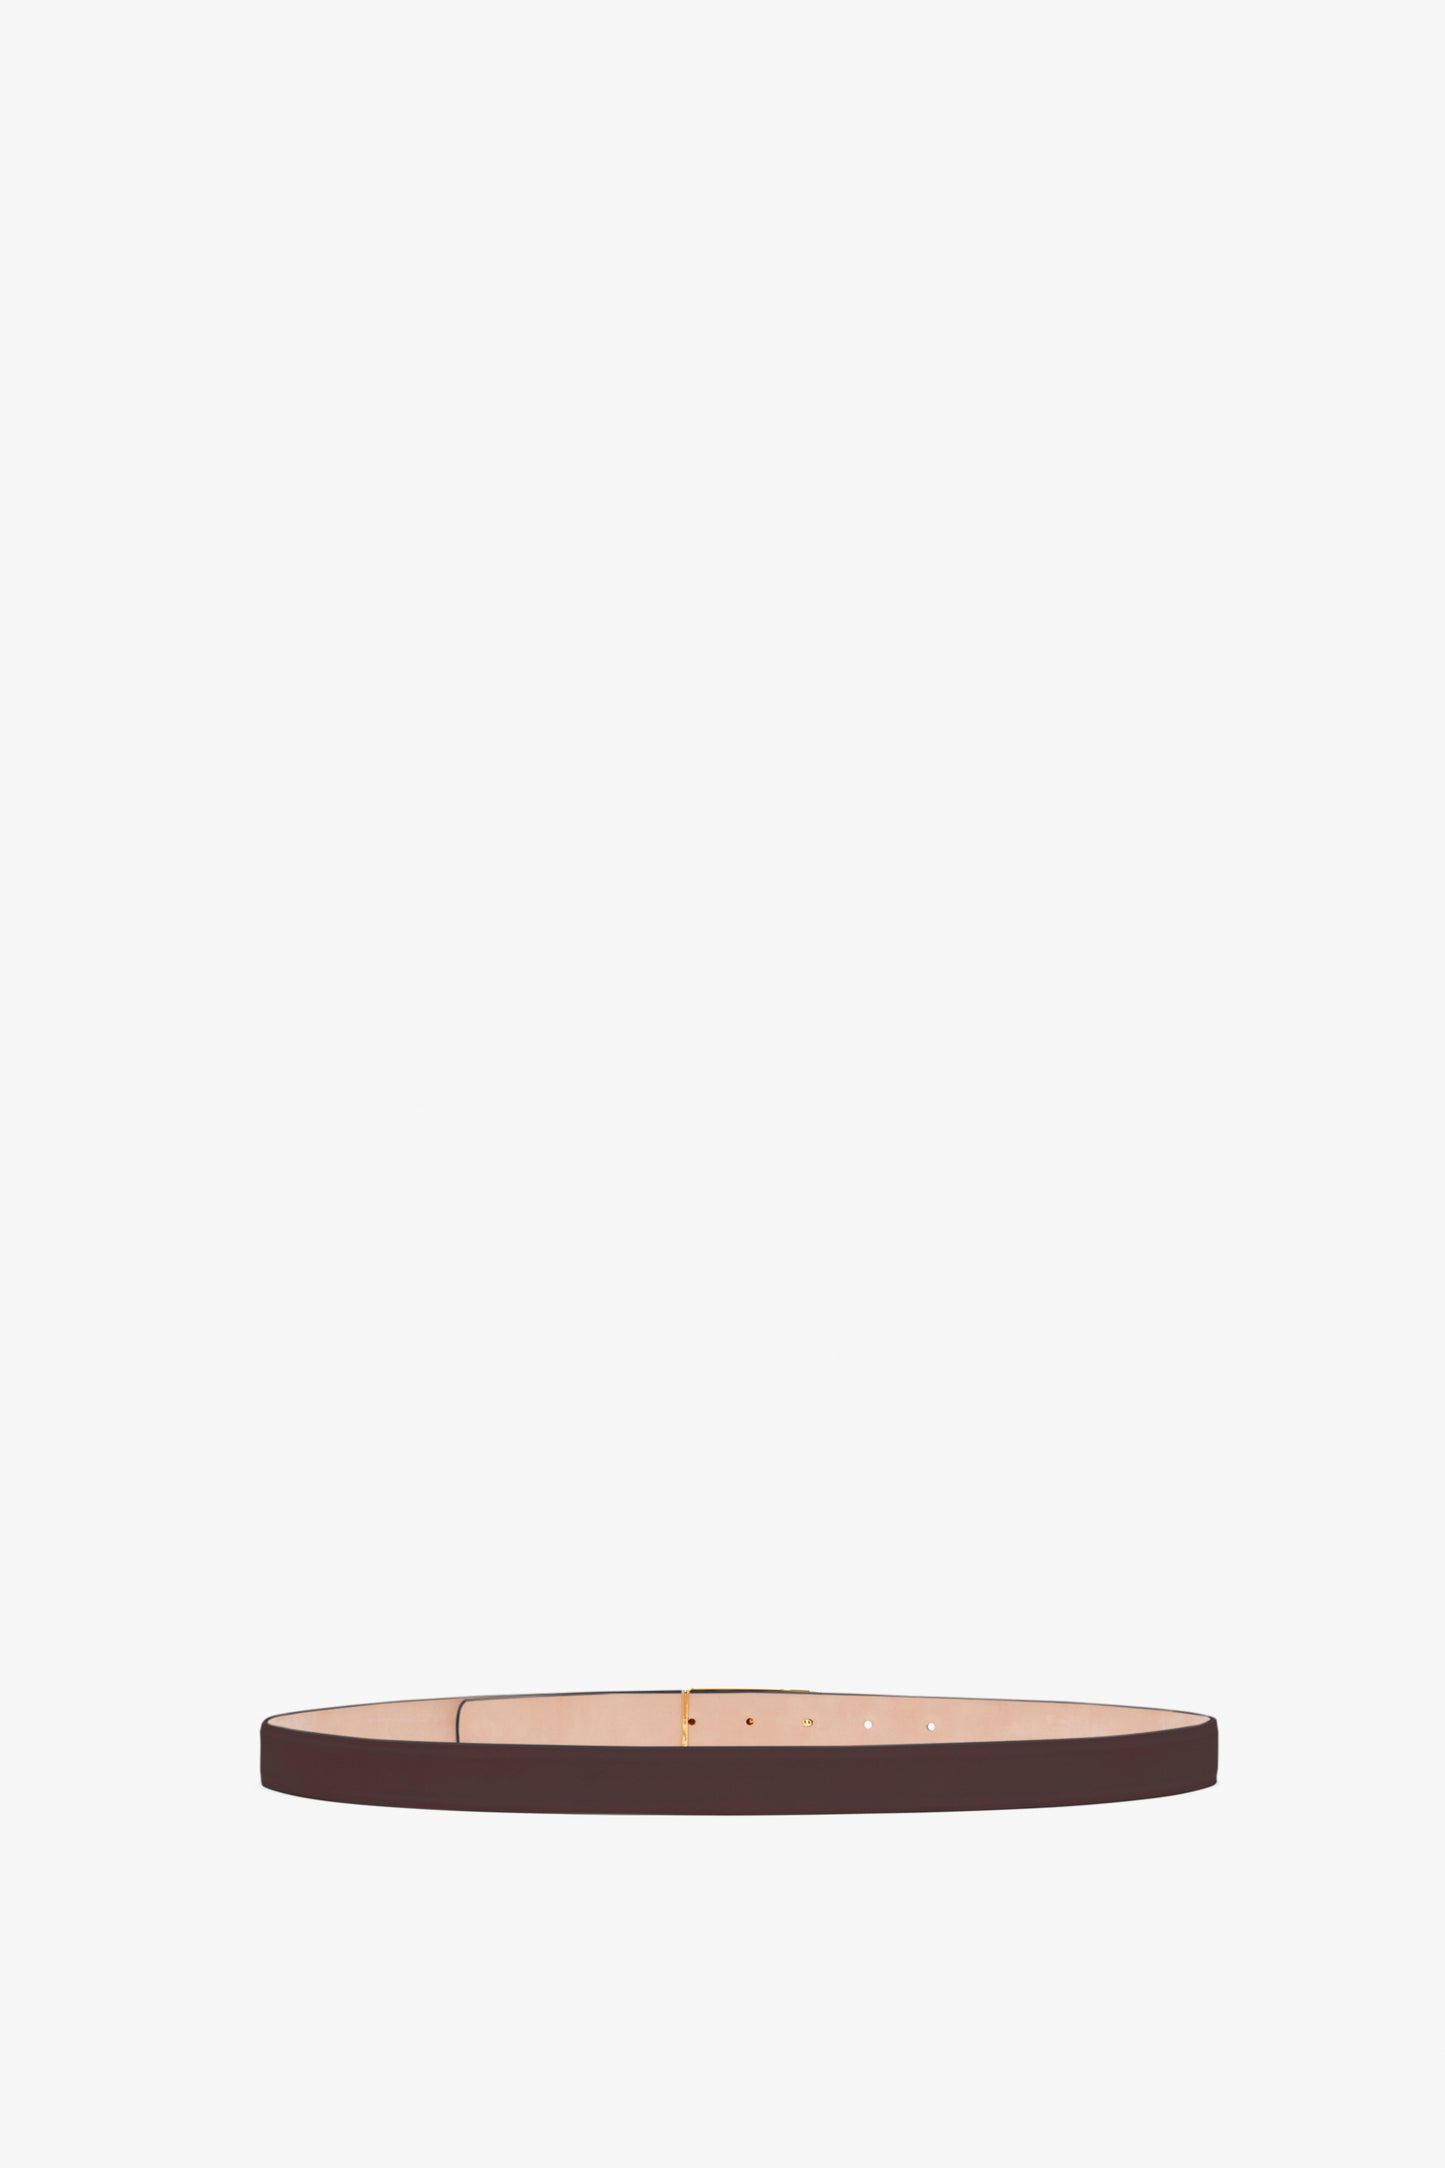 Thin brown calf leather belt with a classic design, featuring a simple buckle and multiple adjustment holes. The Frame Belt In Burgundy Leather by Victoria Beckham is accentuated by gold hardware for an elegant touch.